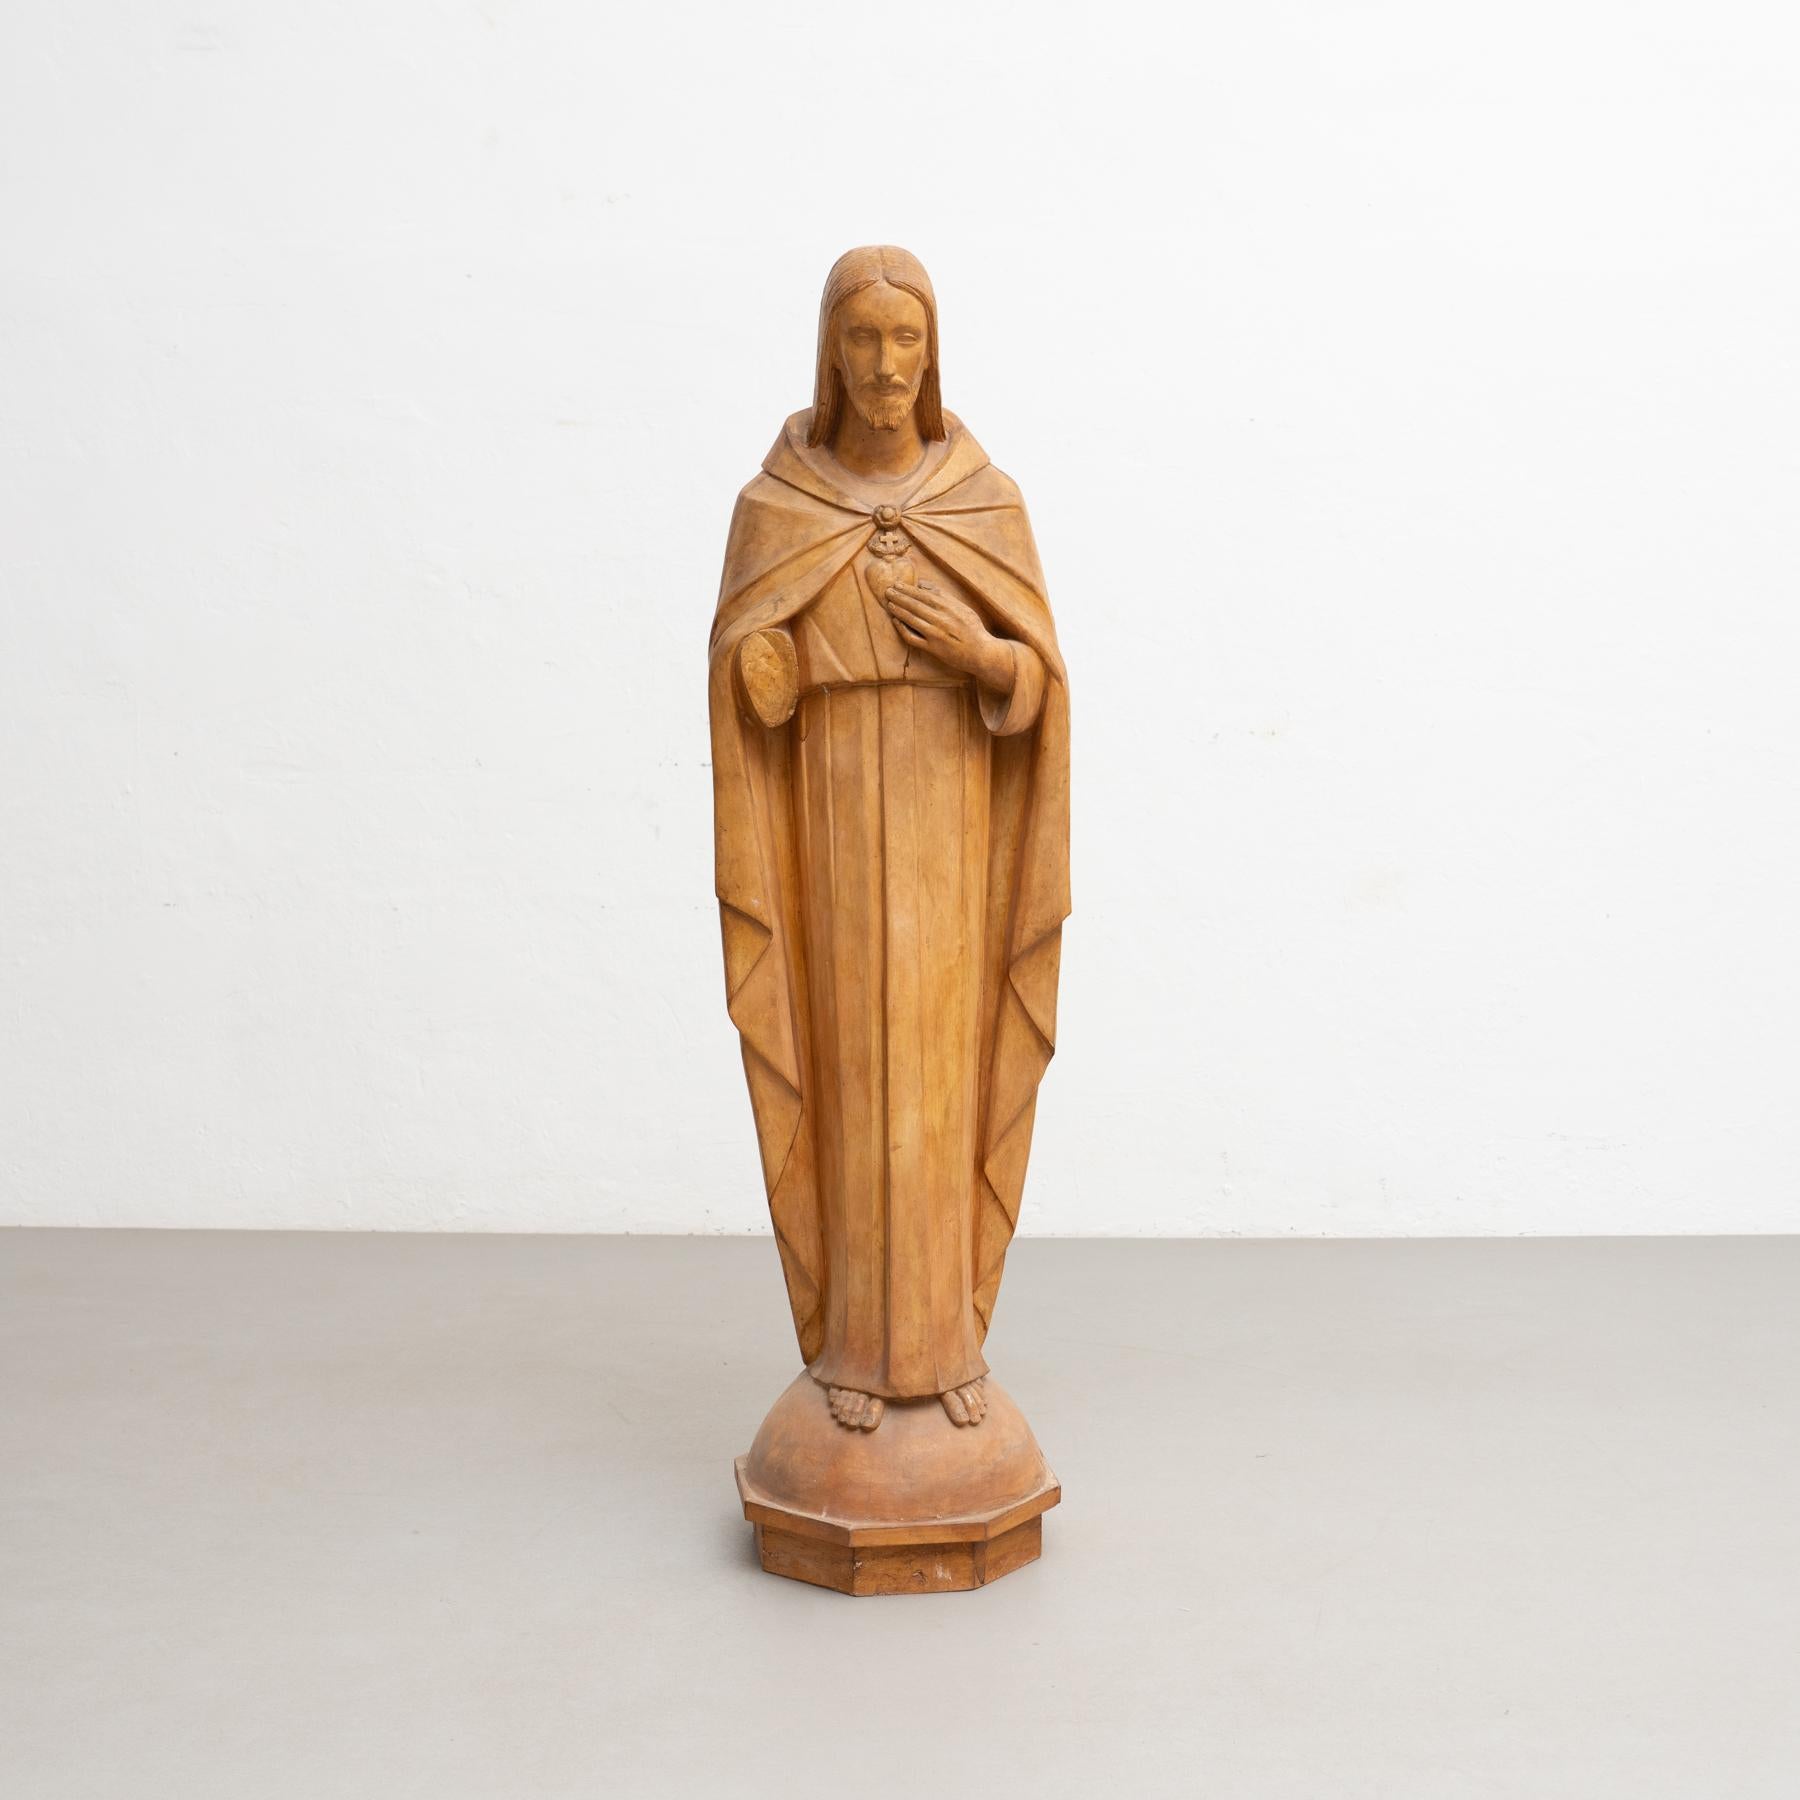 Traditional huge religious plaster figure of a Jesus Christ.

Made in traditional Catalan atelier in Olot, Spain, circa 1950.

In original condition, with minor wear consistent with age and use, preserving a beautiful patina.

Olot has a long